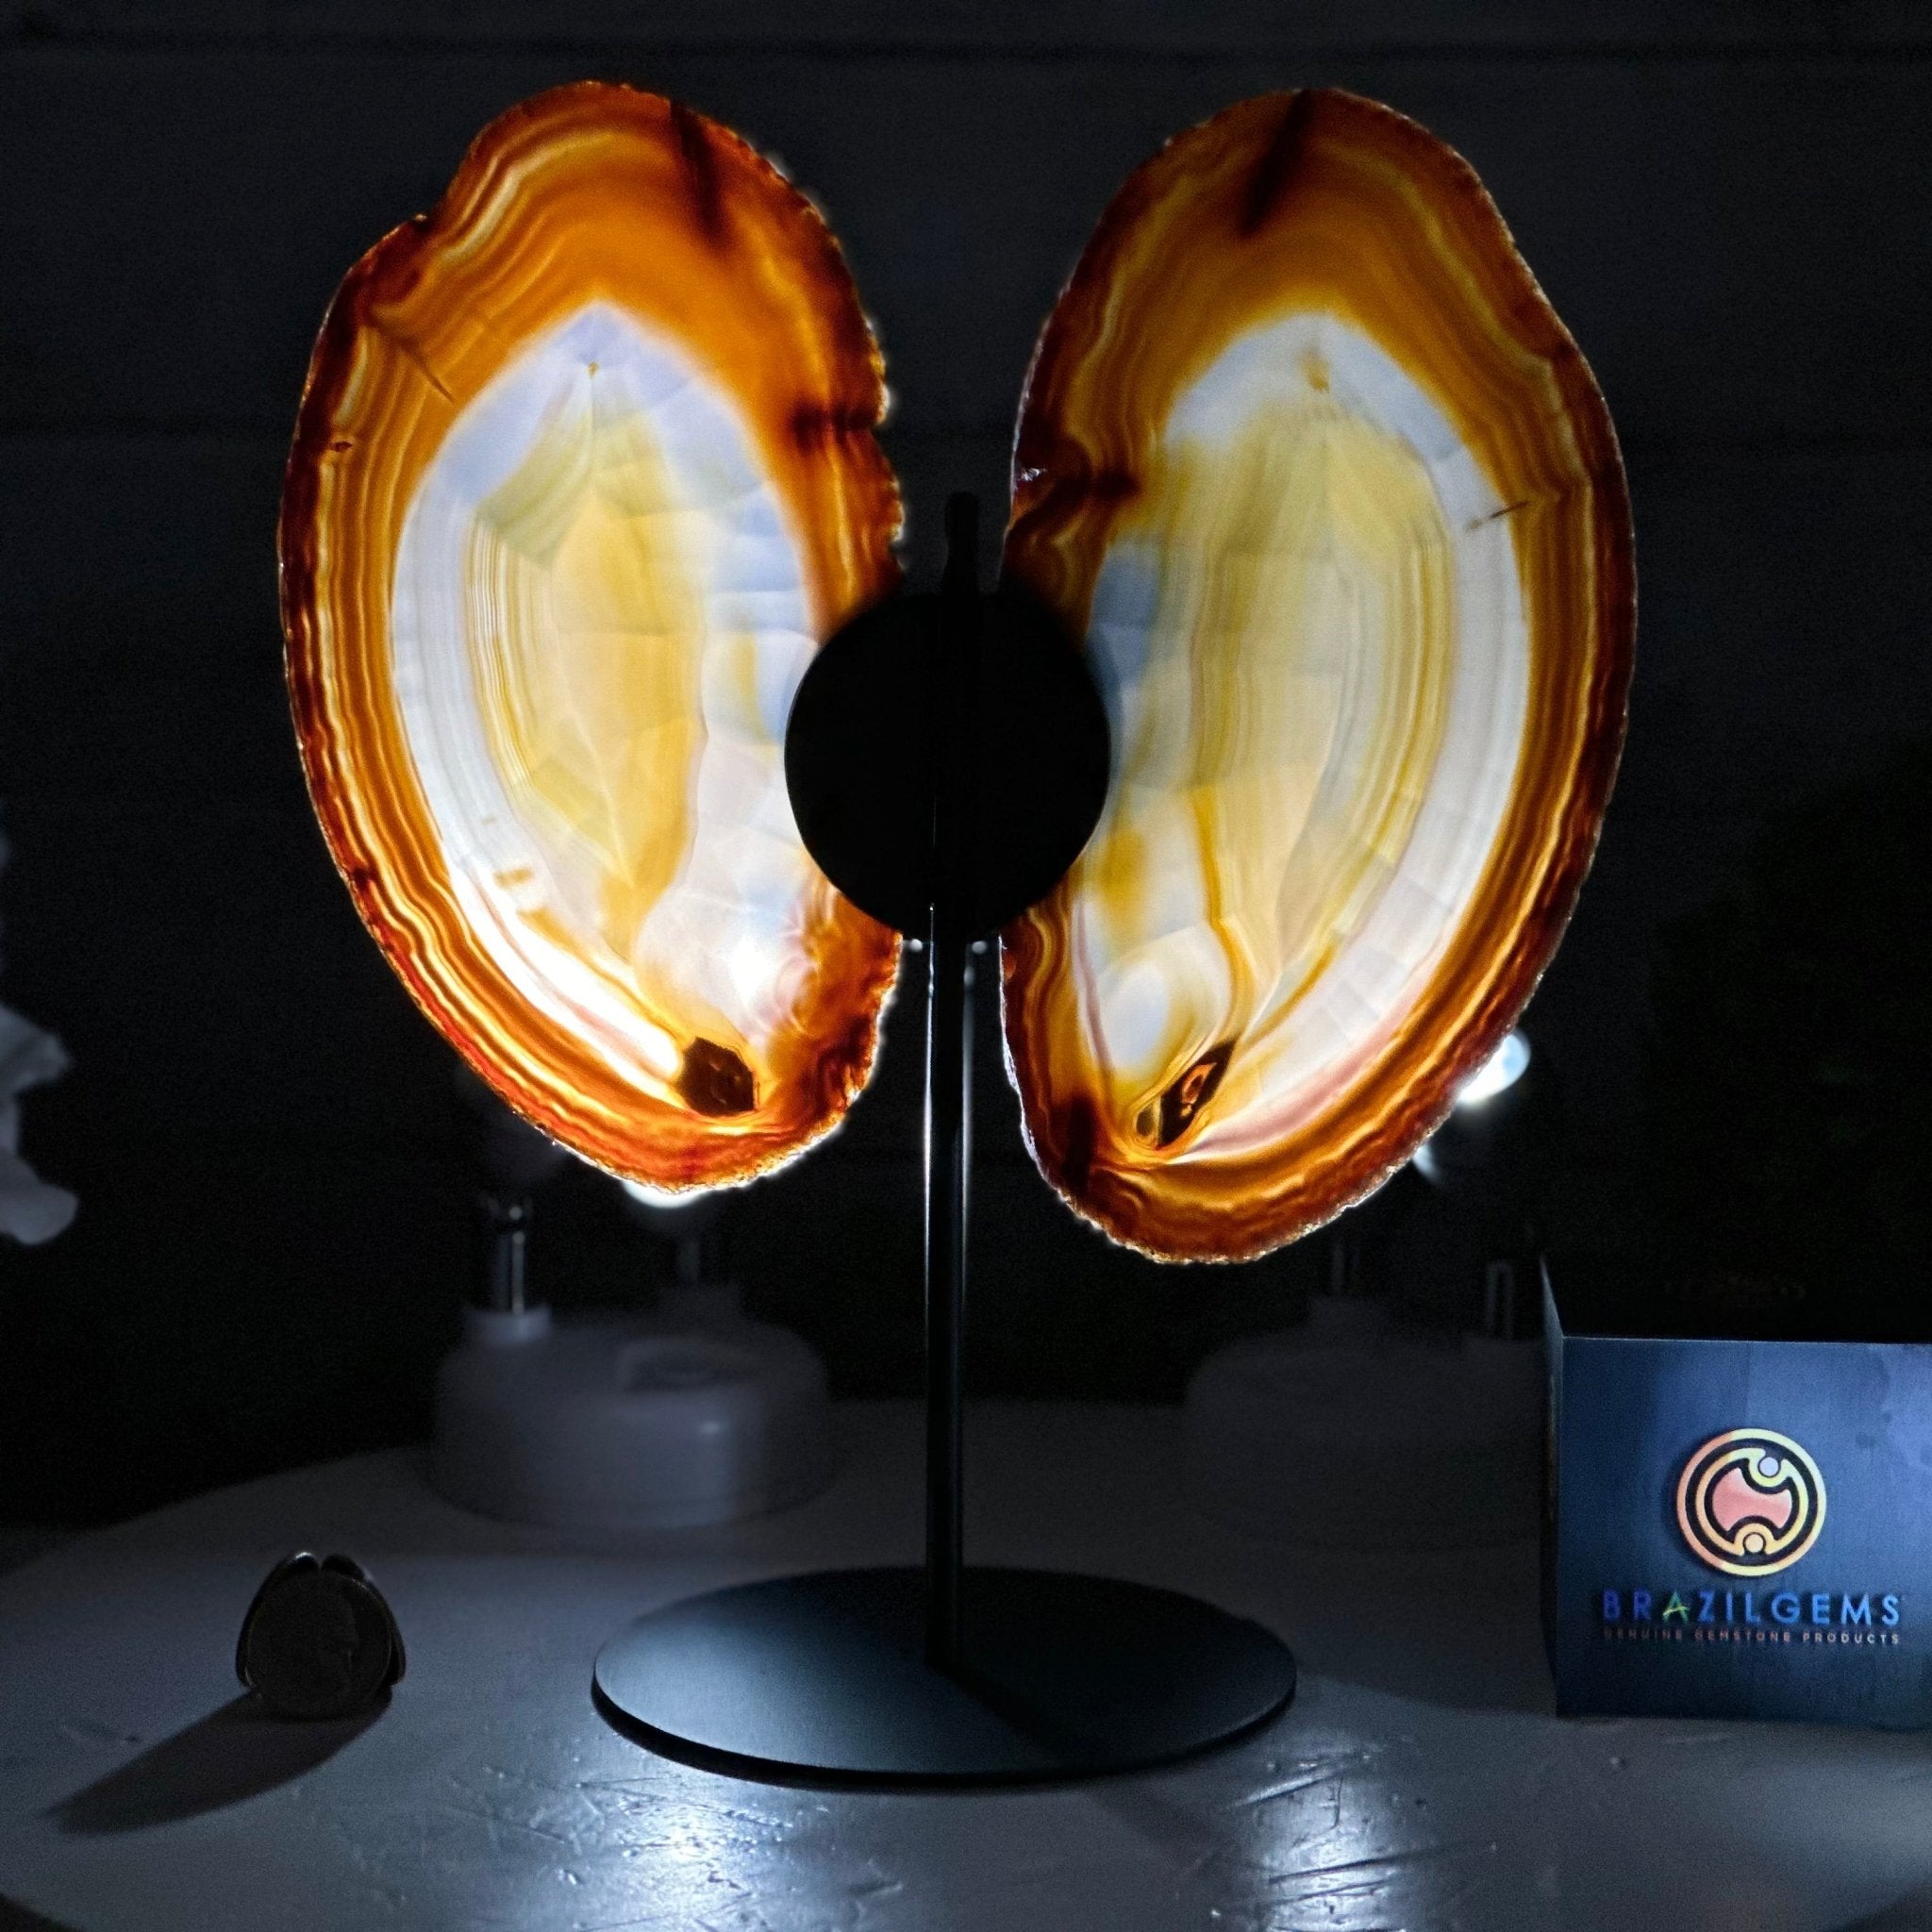 Natural Brazilian Agate "Butterfly Wings", 10.8" Tall #5050NA-120 - Brazil GemsBrazil GemsNatural Brazilian Agate "Butterfly Wings", 10.8" Tall #5050NA-120Agate Butterfly Wings5050NA-120